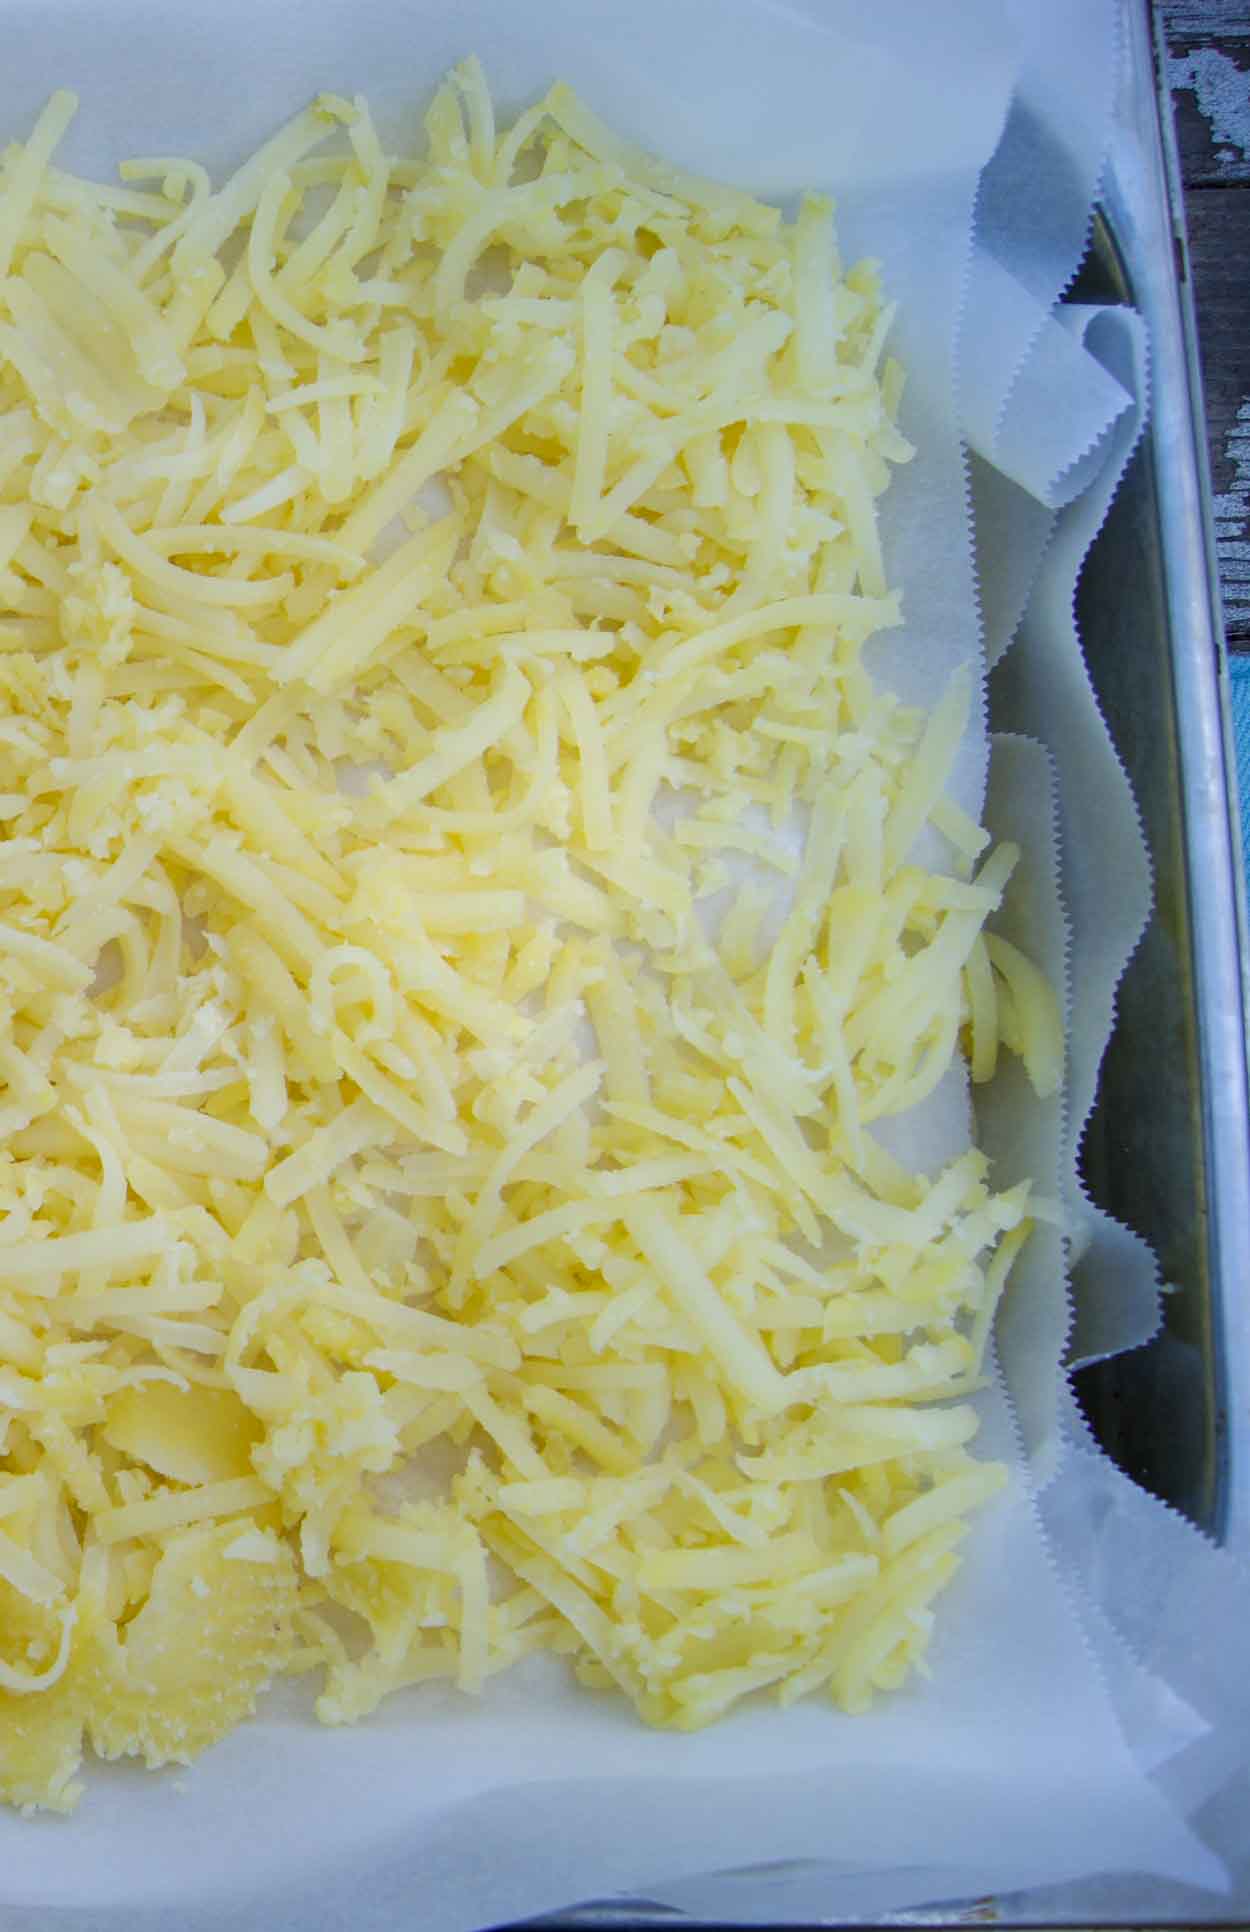 A large sheet with shredded parboiled potatoes ready to be flash frozen for hash browns.